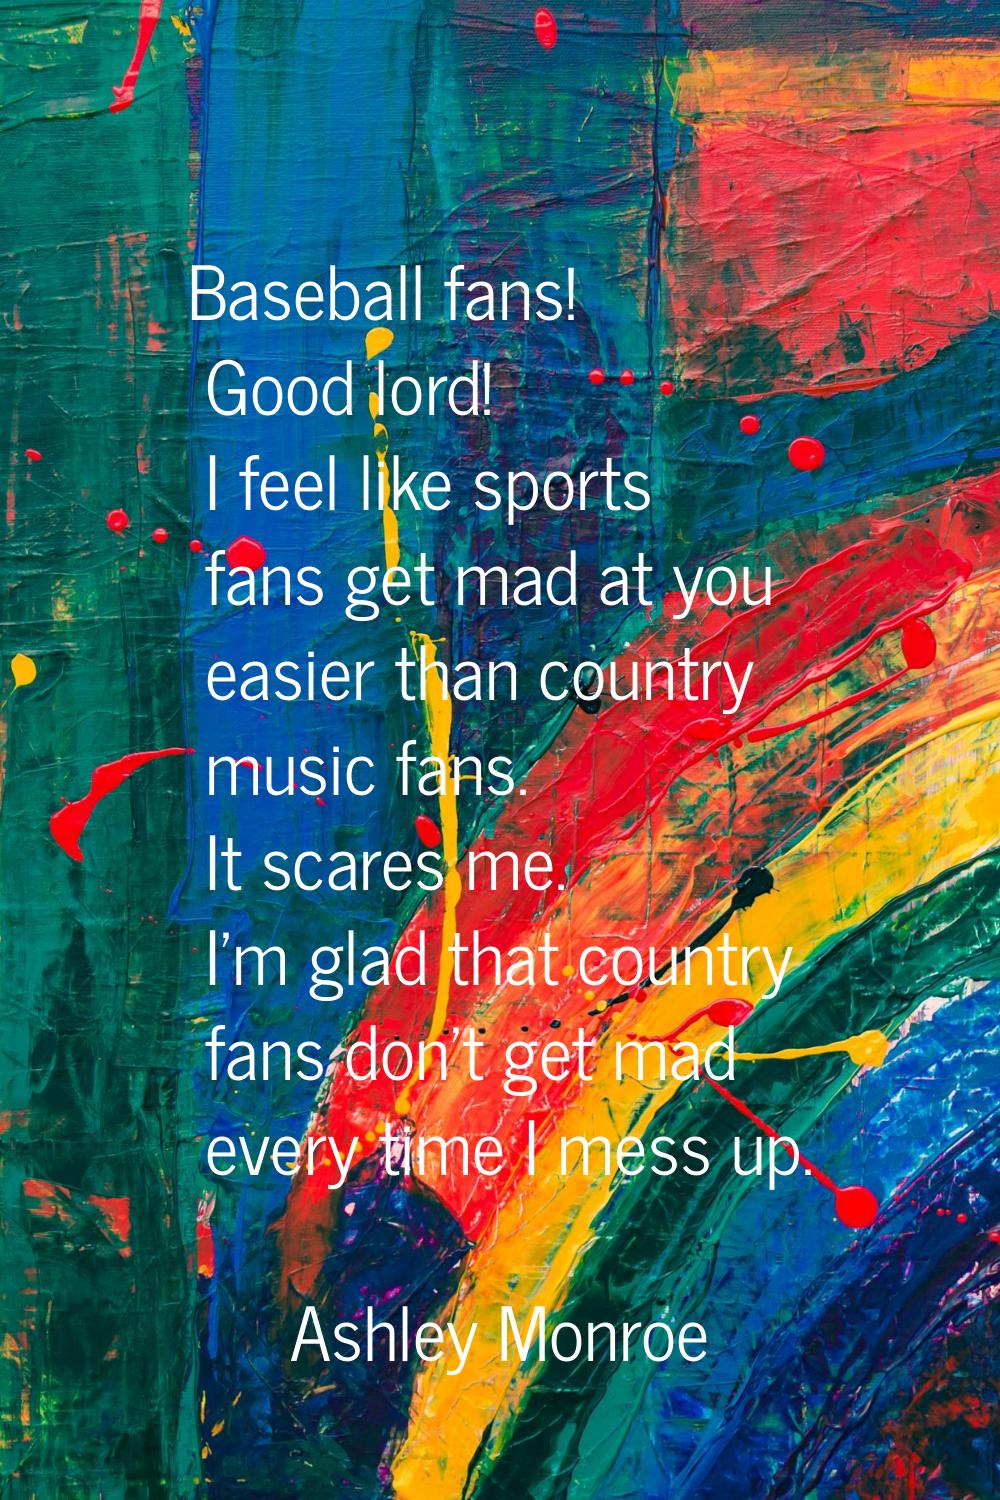 Baseball fans! Good lord! I feel like sports fans get mad at you easier than country music fans. It